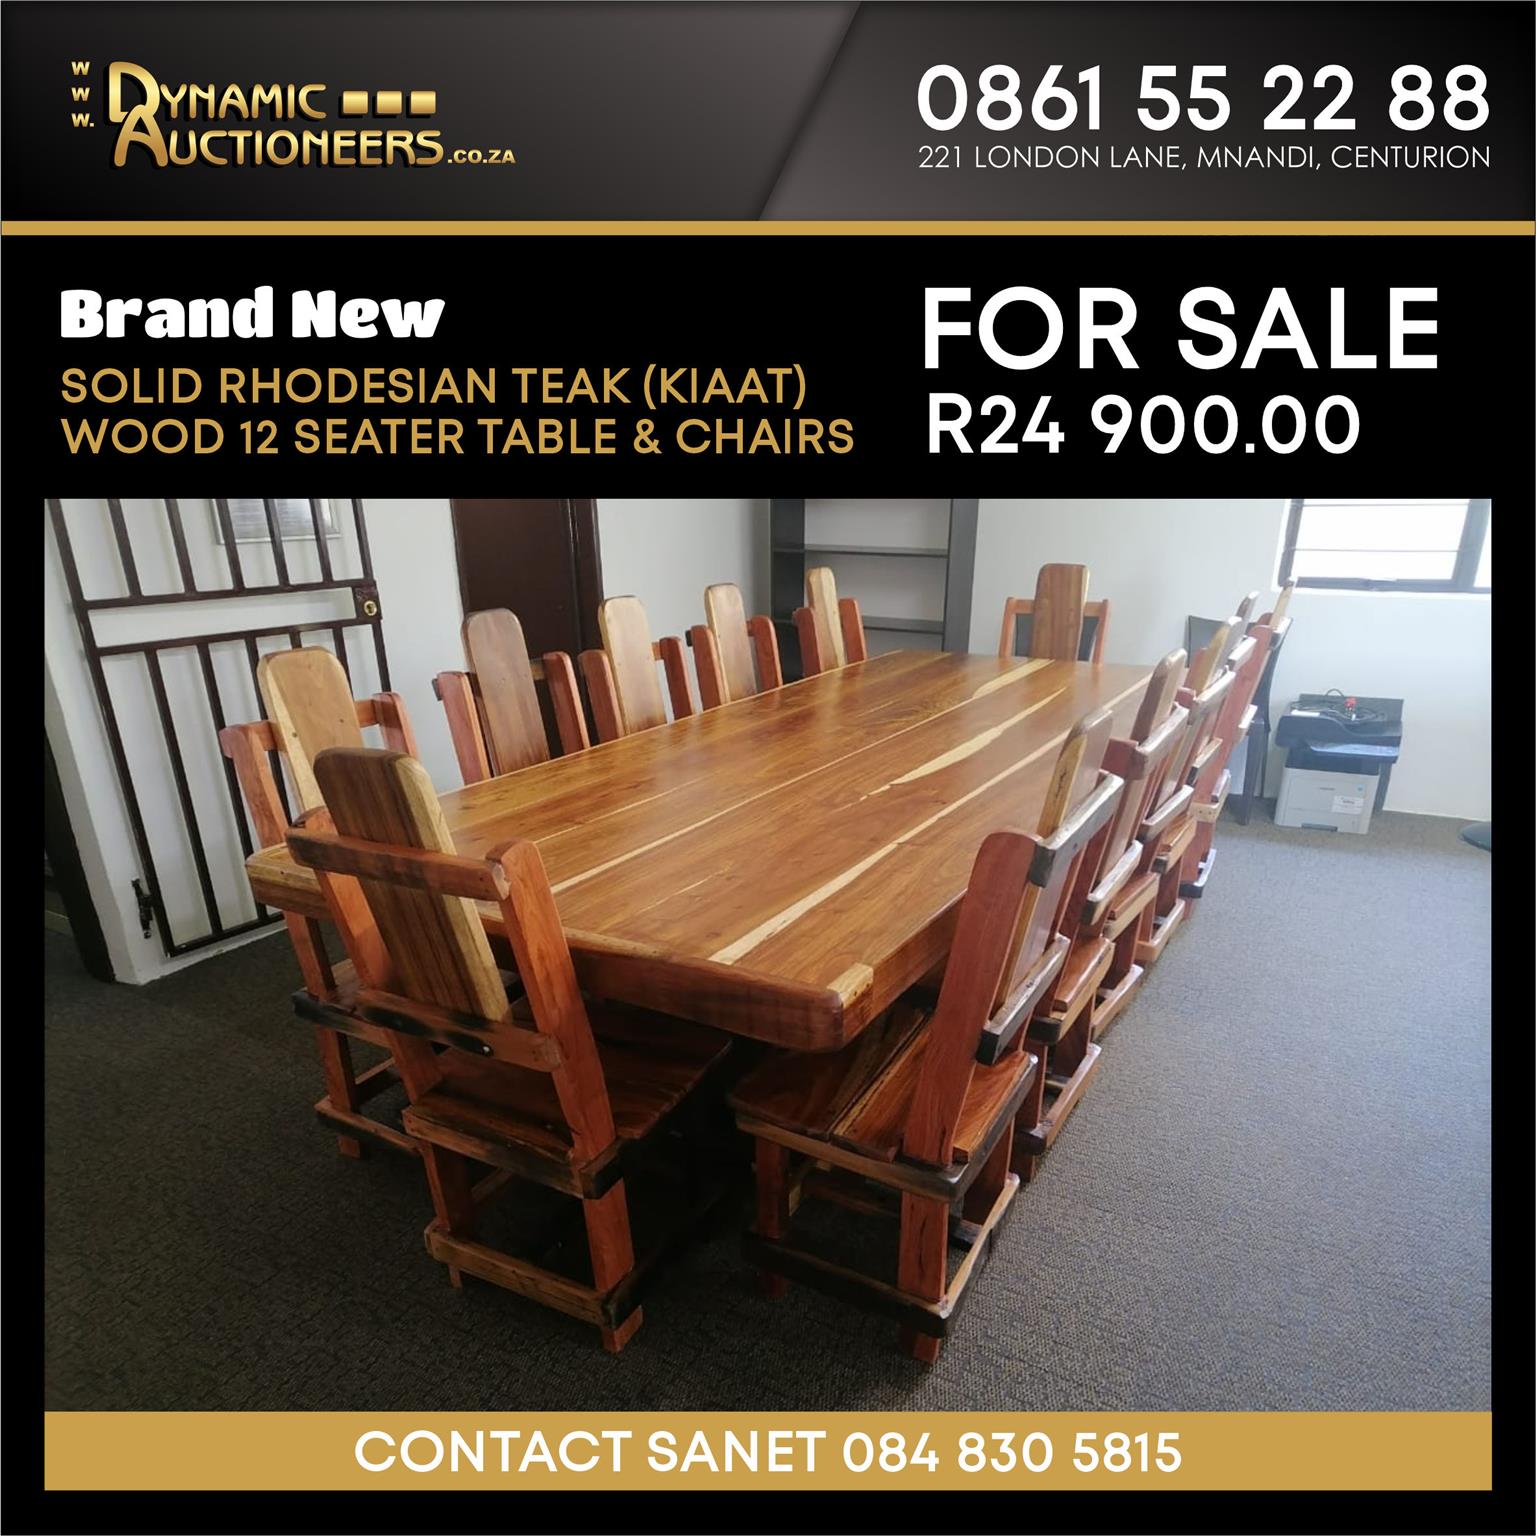 12 SEATER WOODEN TABLE WITH CHAIRS FOR SALE